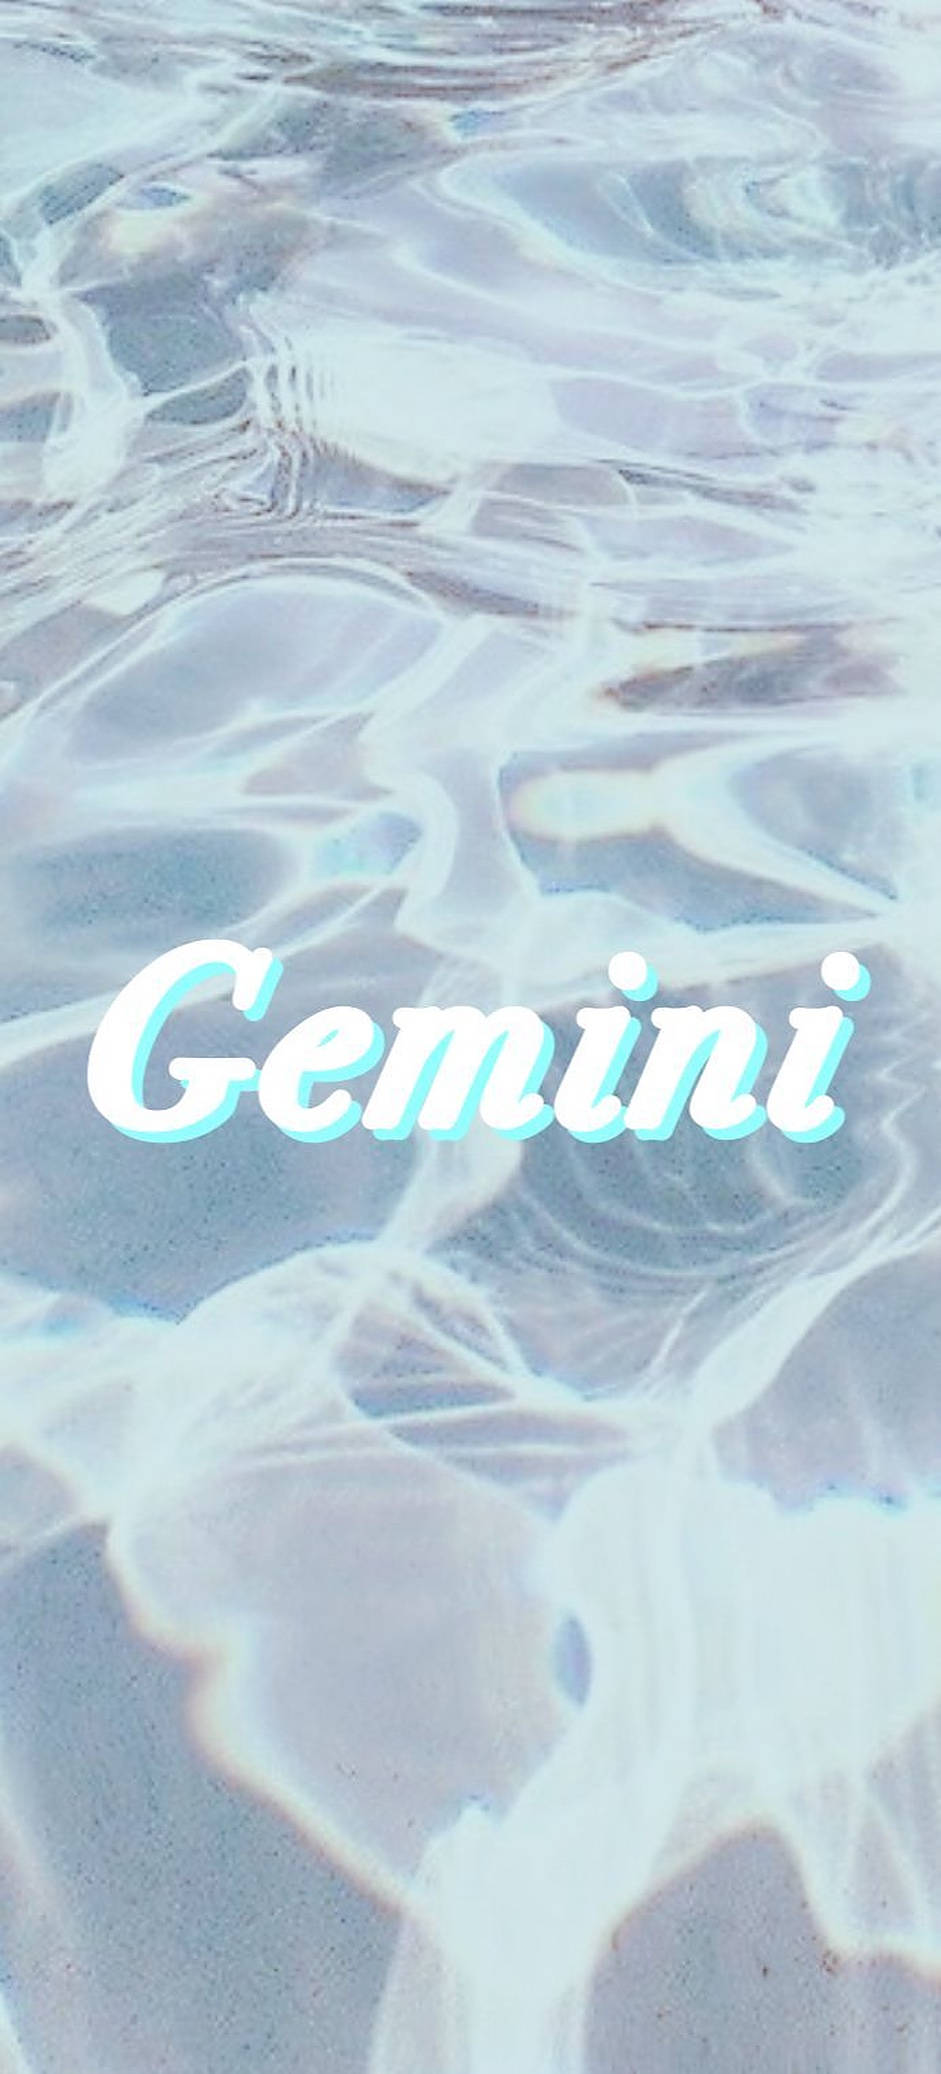 A blue water with the word gini on it - Aqua, Gemini